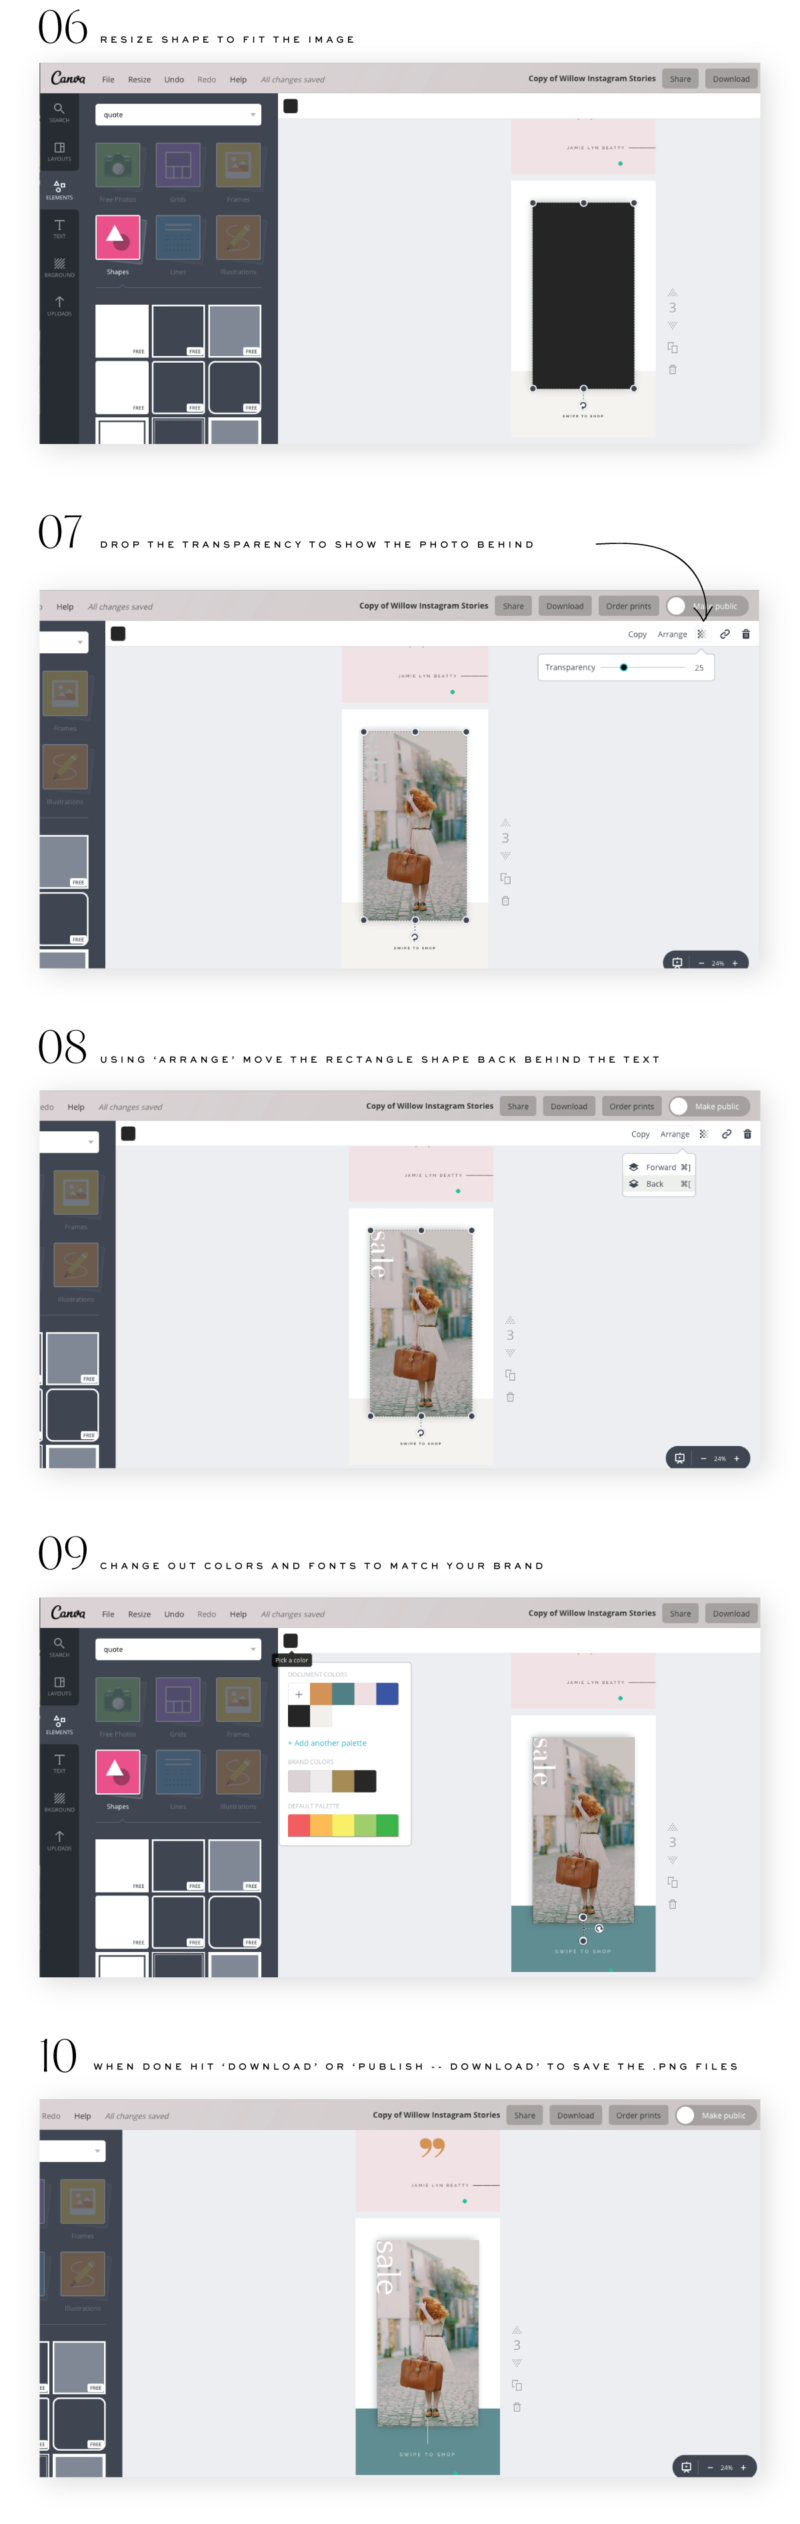 How to Edit Social Media Templates in Canva